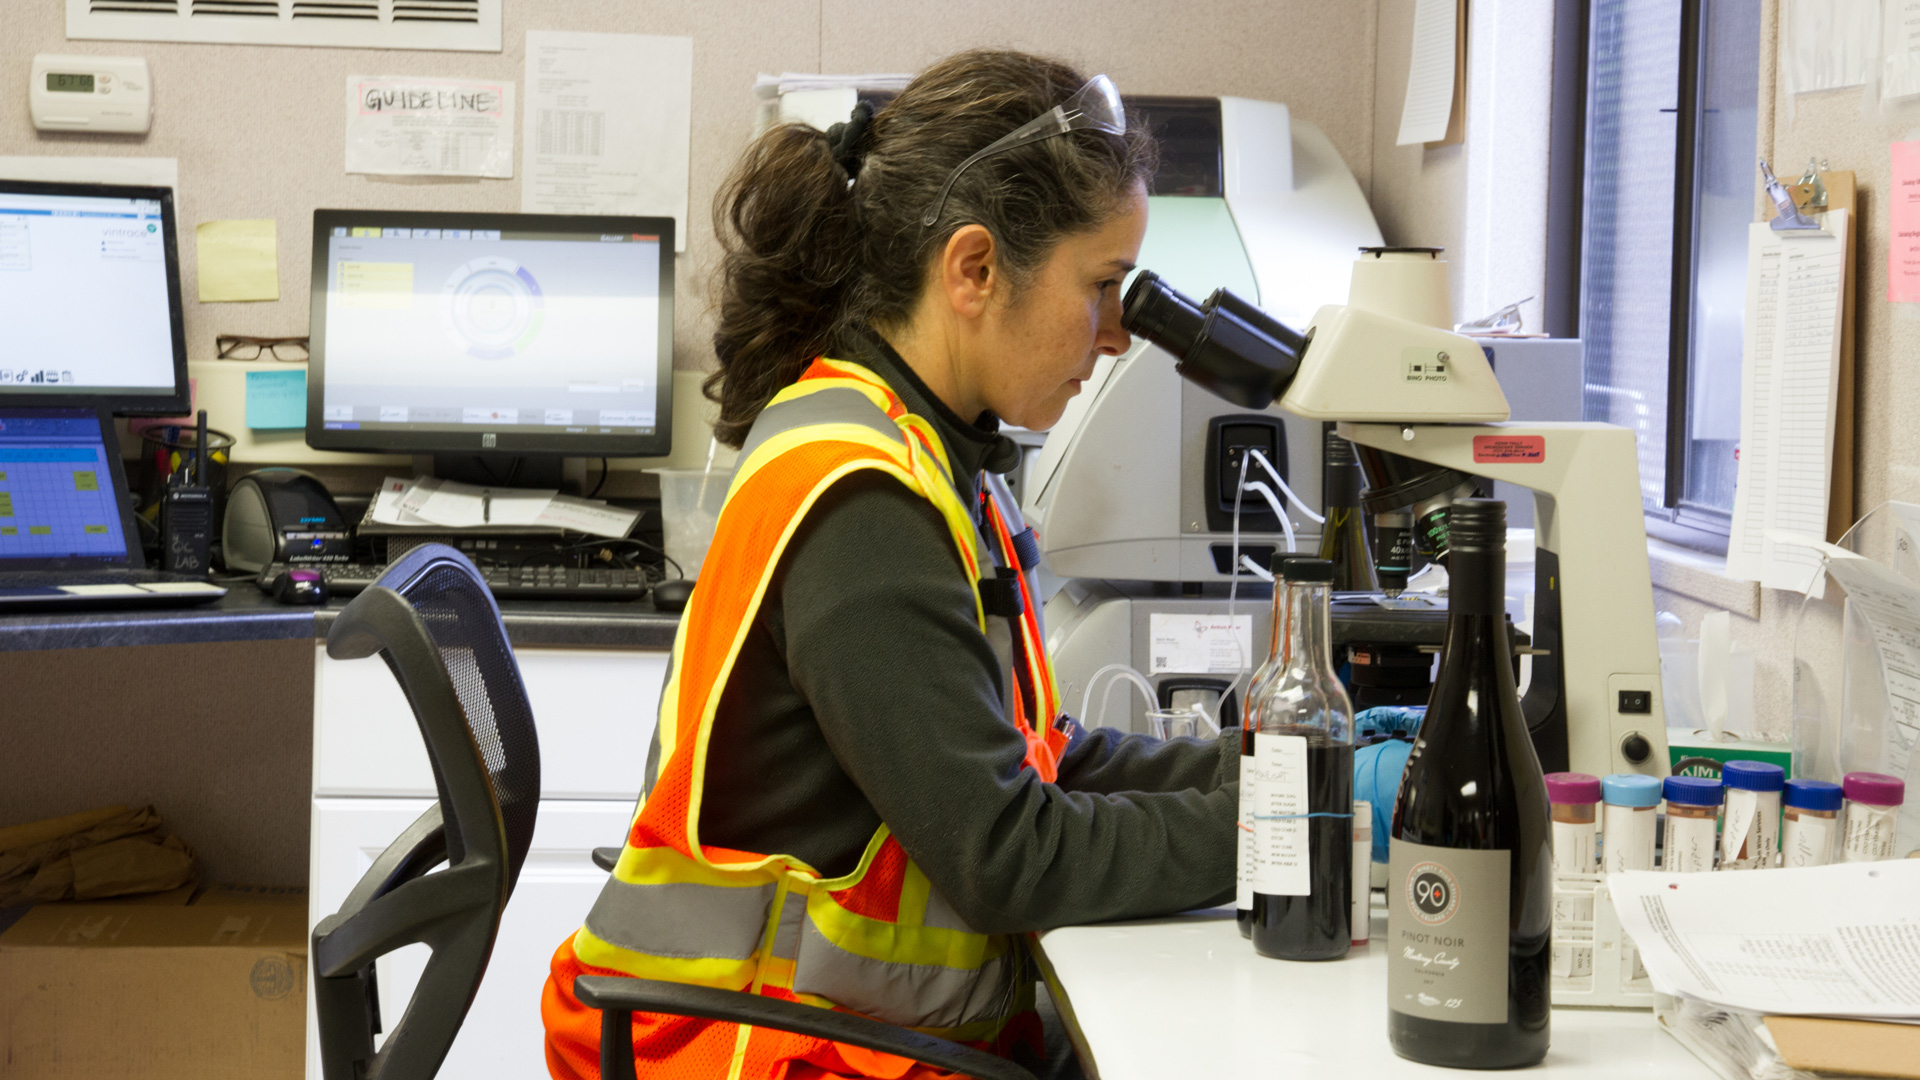 Employee performing yeast culture cell-counting in the wine lab.